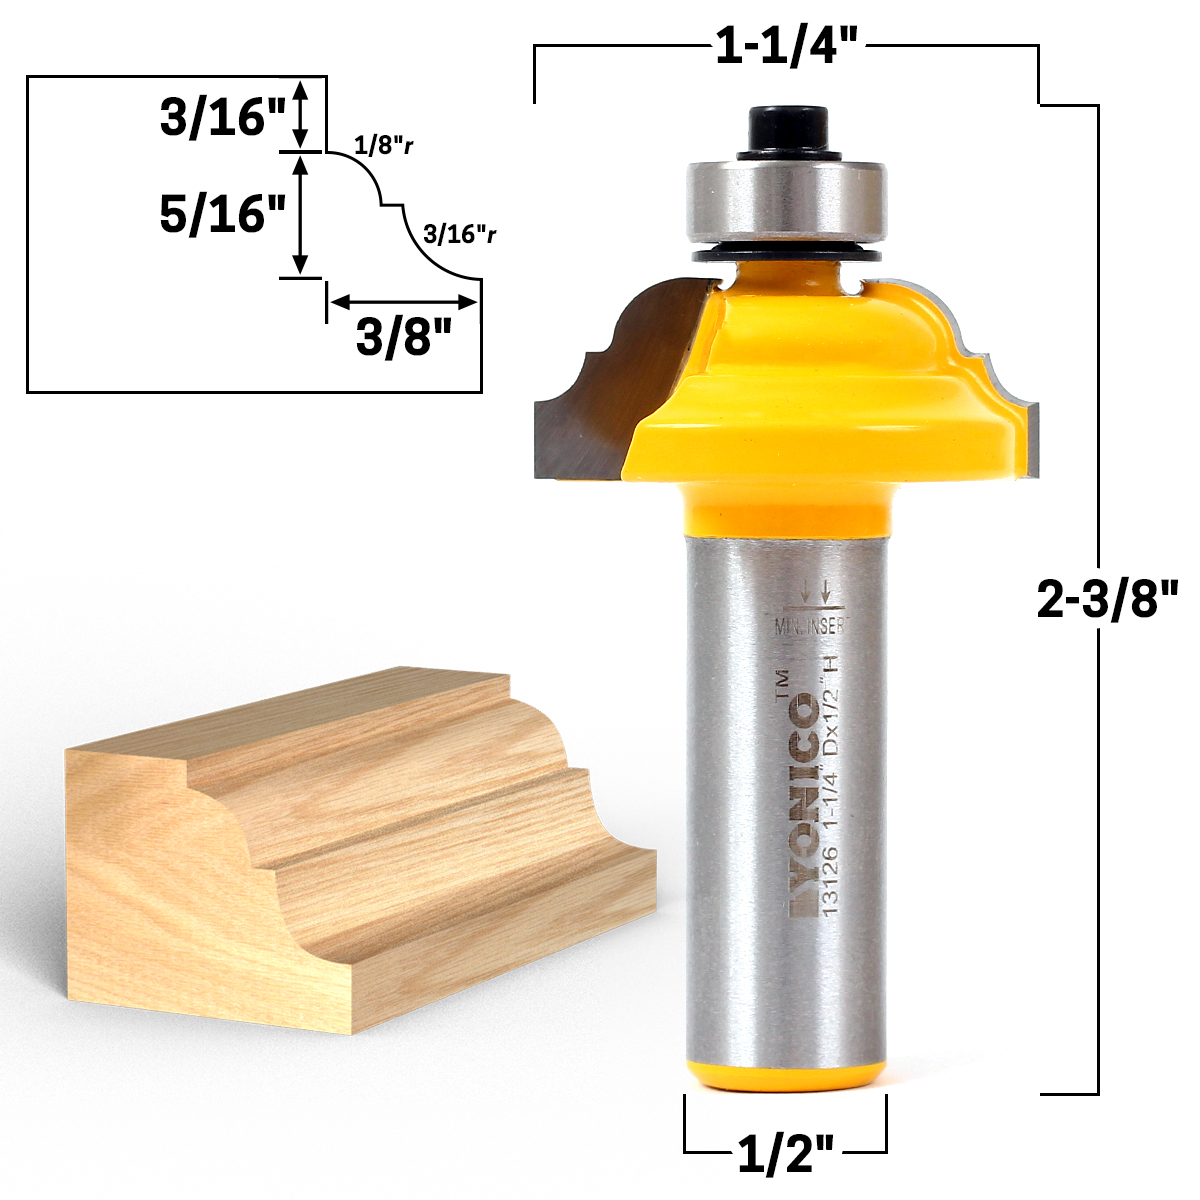 5/16" Classical Roman Ogee Edge Forming Router Bit 1/4" Shank Yonico 13122q